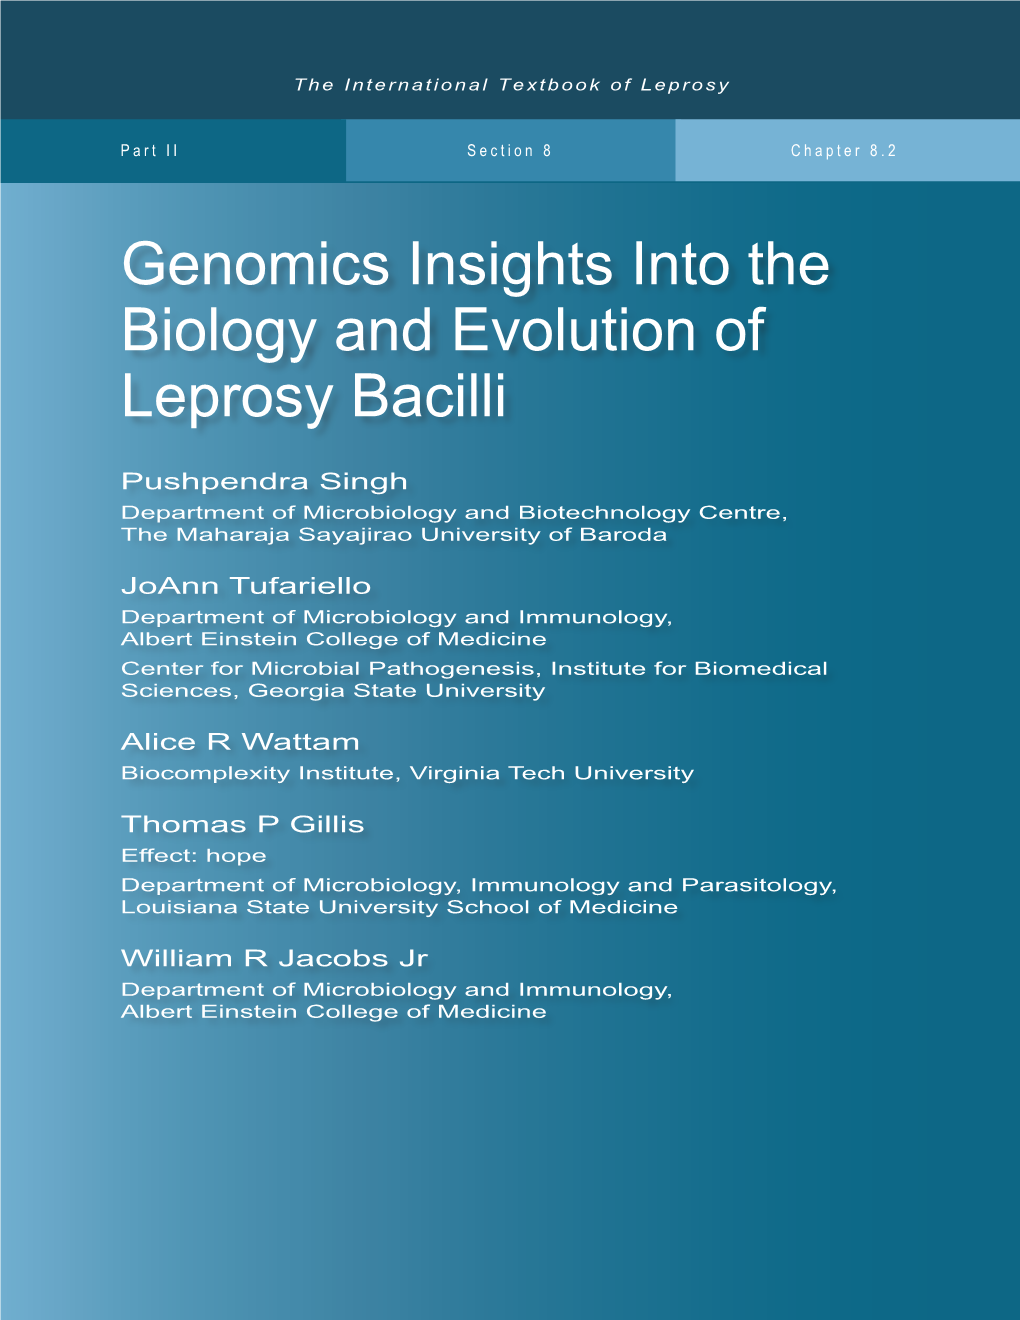 Genomics Insights Into the Biology and Evolution of Leprosy Bacilli